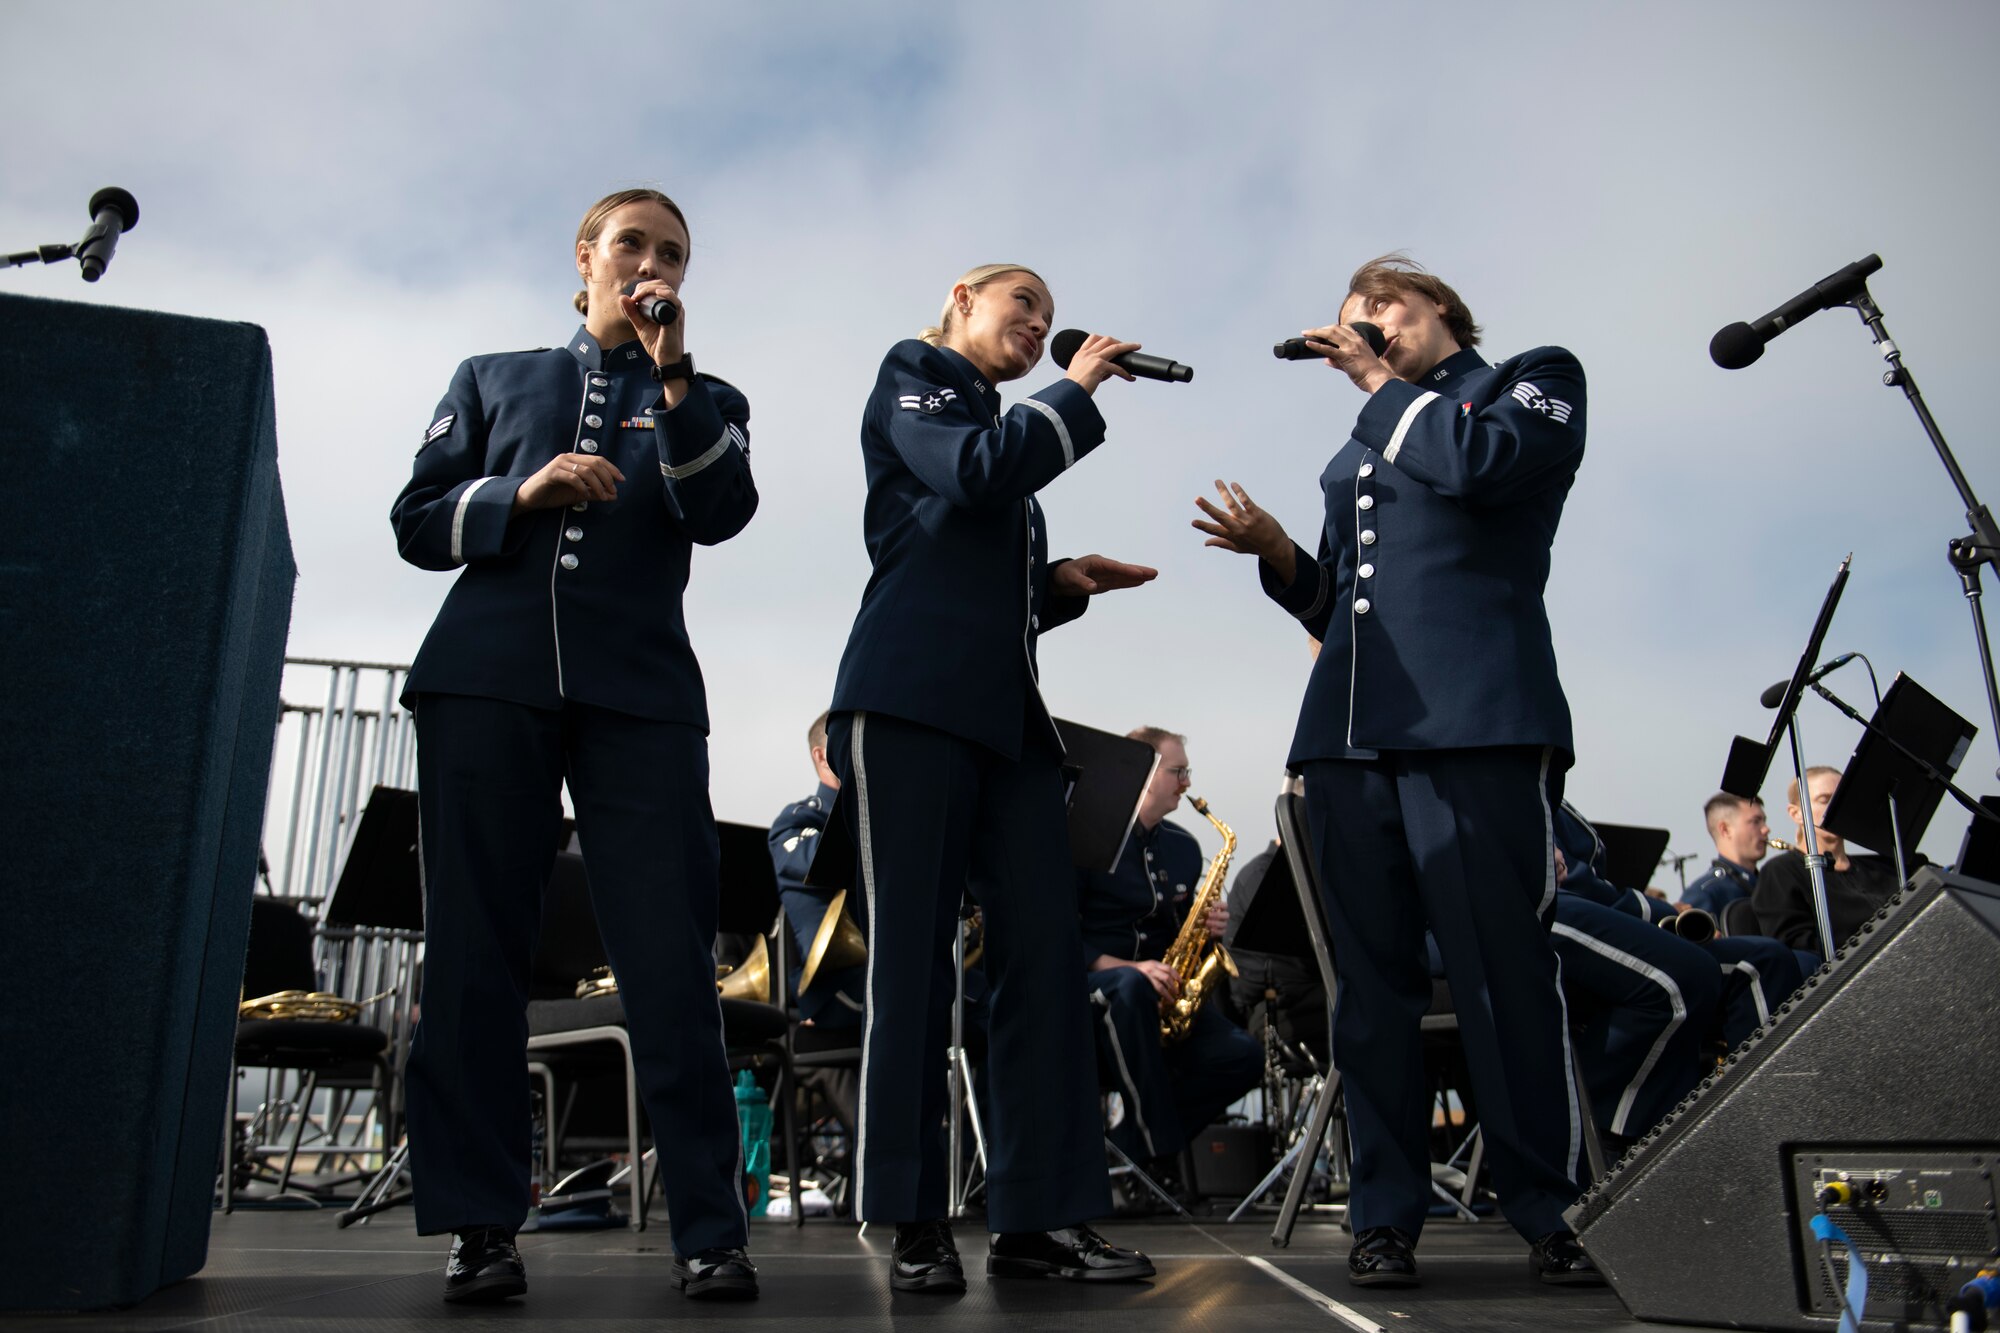 From left to right, U.S. Air Force Senior Airman Anna Gilpatrick, Airman 1st Class Natalie Angst, and Staff Sgt. Alena Zidlicky, USAF Band of the Golden West vocalists, perform at the Presidio Tunnel Tops, San Francisco, California, Oct. 6, 2022.